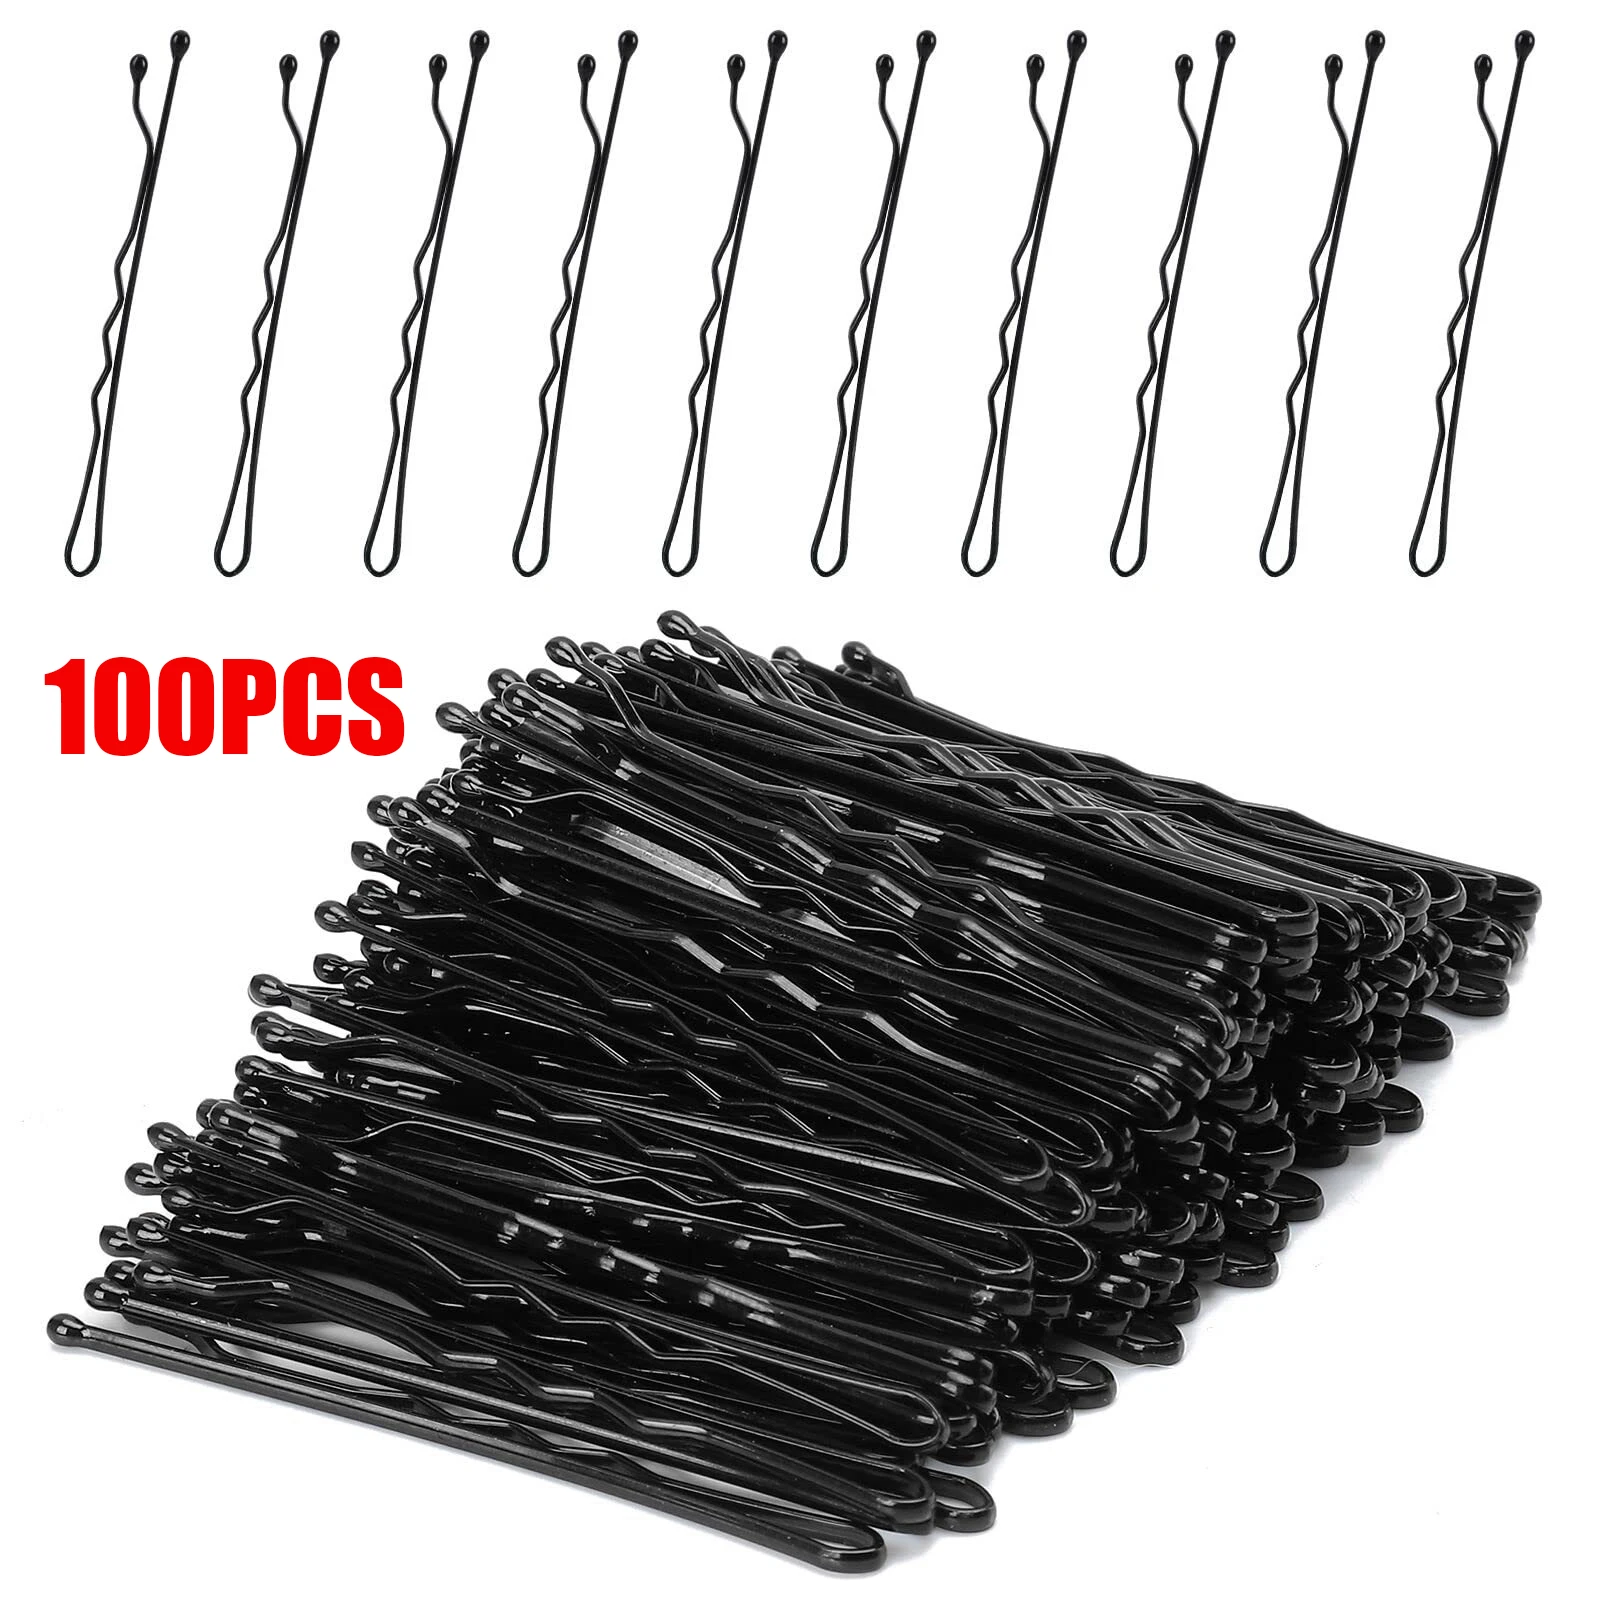 100PCS Brown Hair Pins black Hairpins Invisible Wave Hairgrip Barrette Hairclip Bulk Hair Accessories for Women Lady Girls Kids 3 pack notebooks journals bulk with 3 black pens a5 hardcover notebook classic ruled lined journal set with pen holder for work